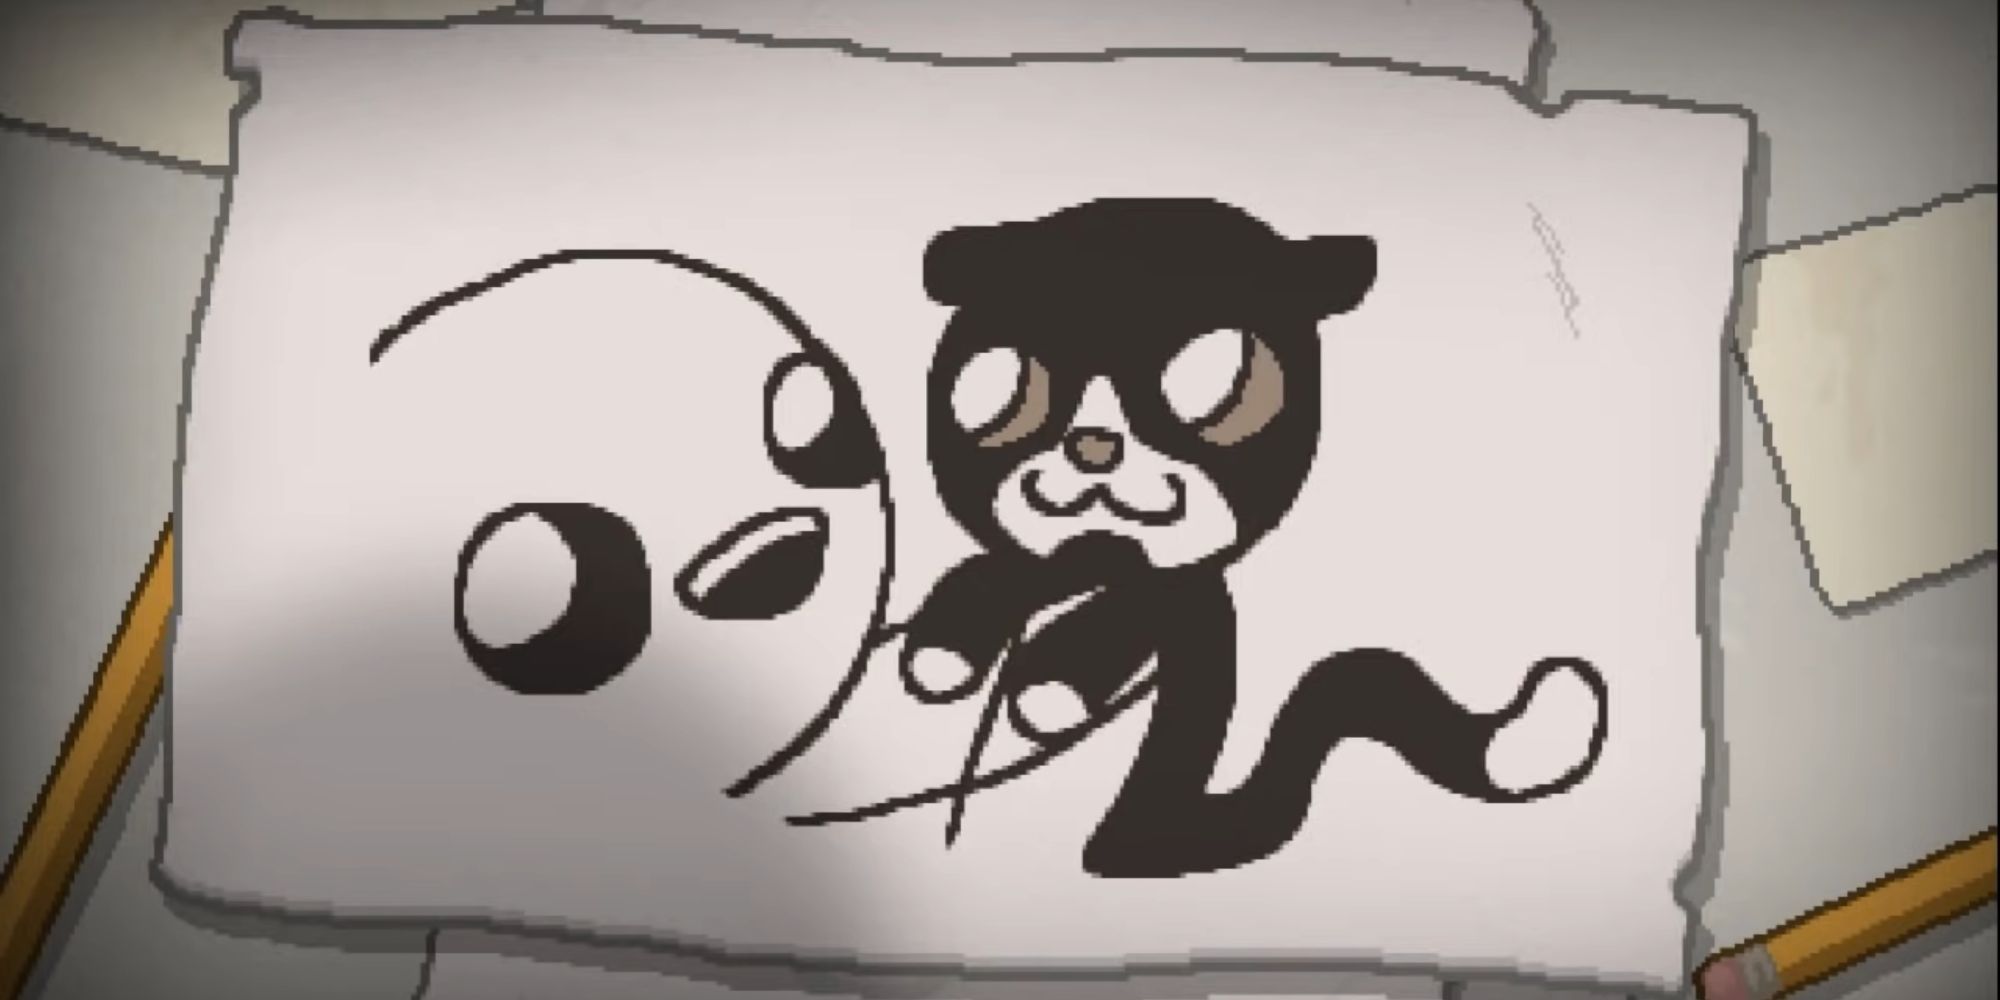 The Binding of Isaac Ending - A drawing of Isaac happy with Guppy the cat